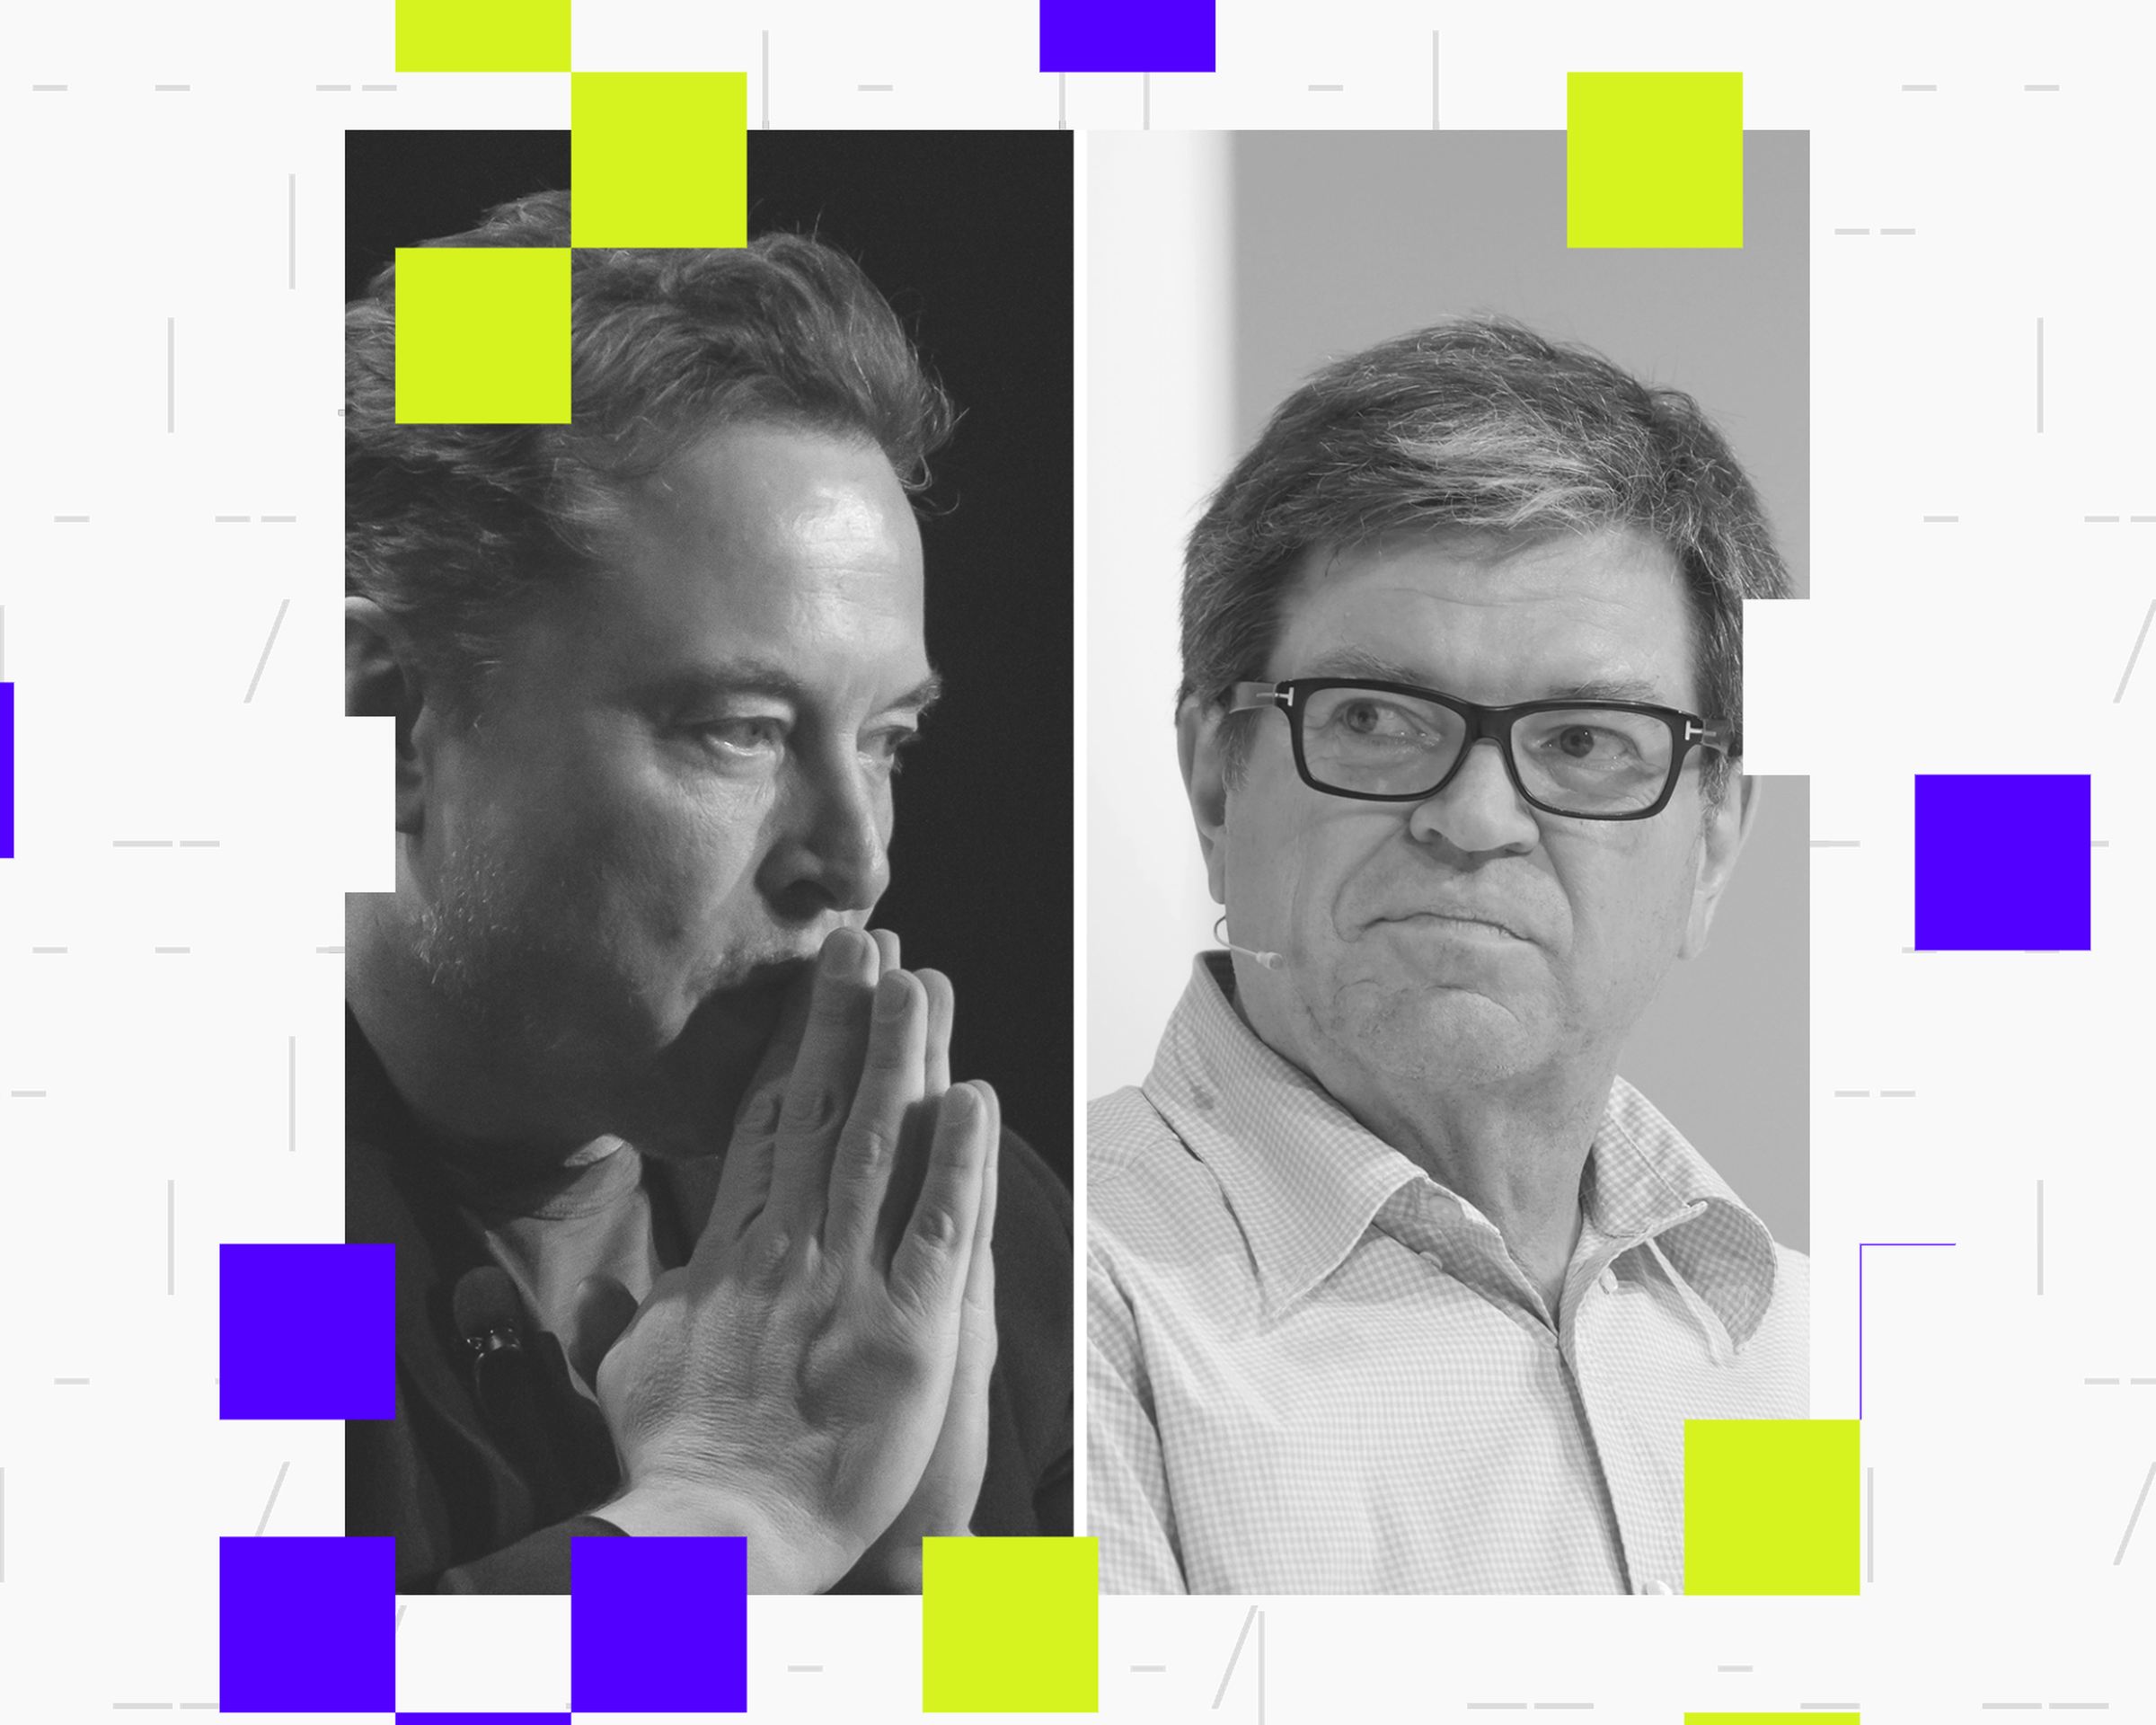 A side by side photo of Elon Musk and Yann LeCun.